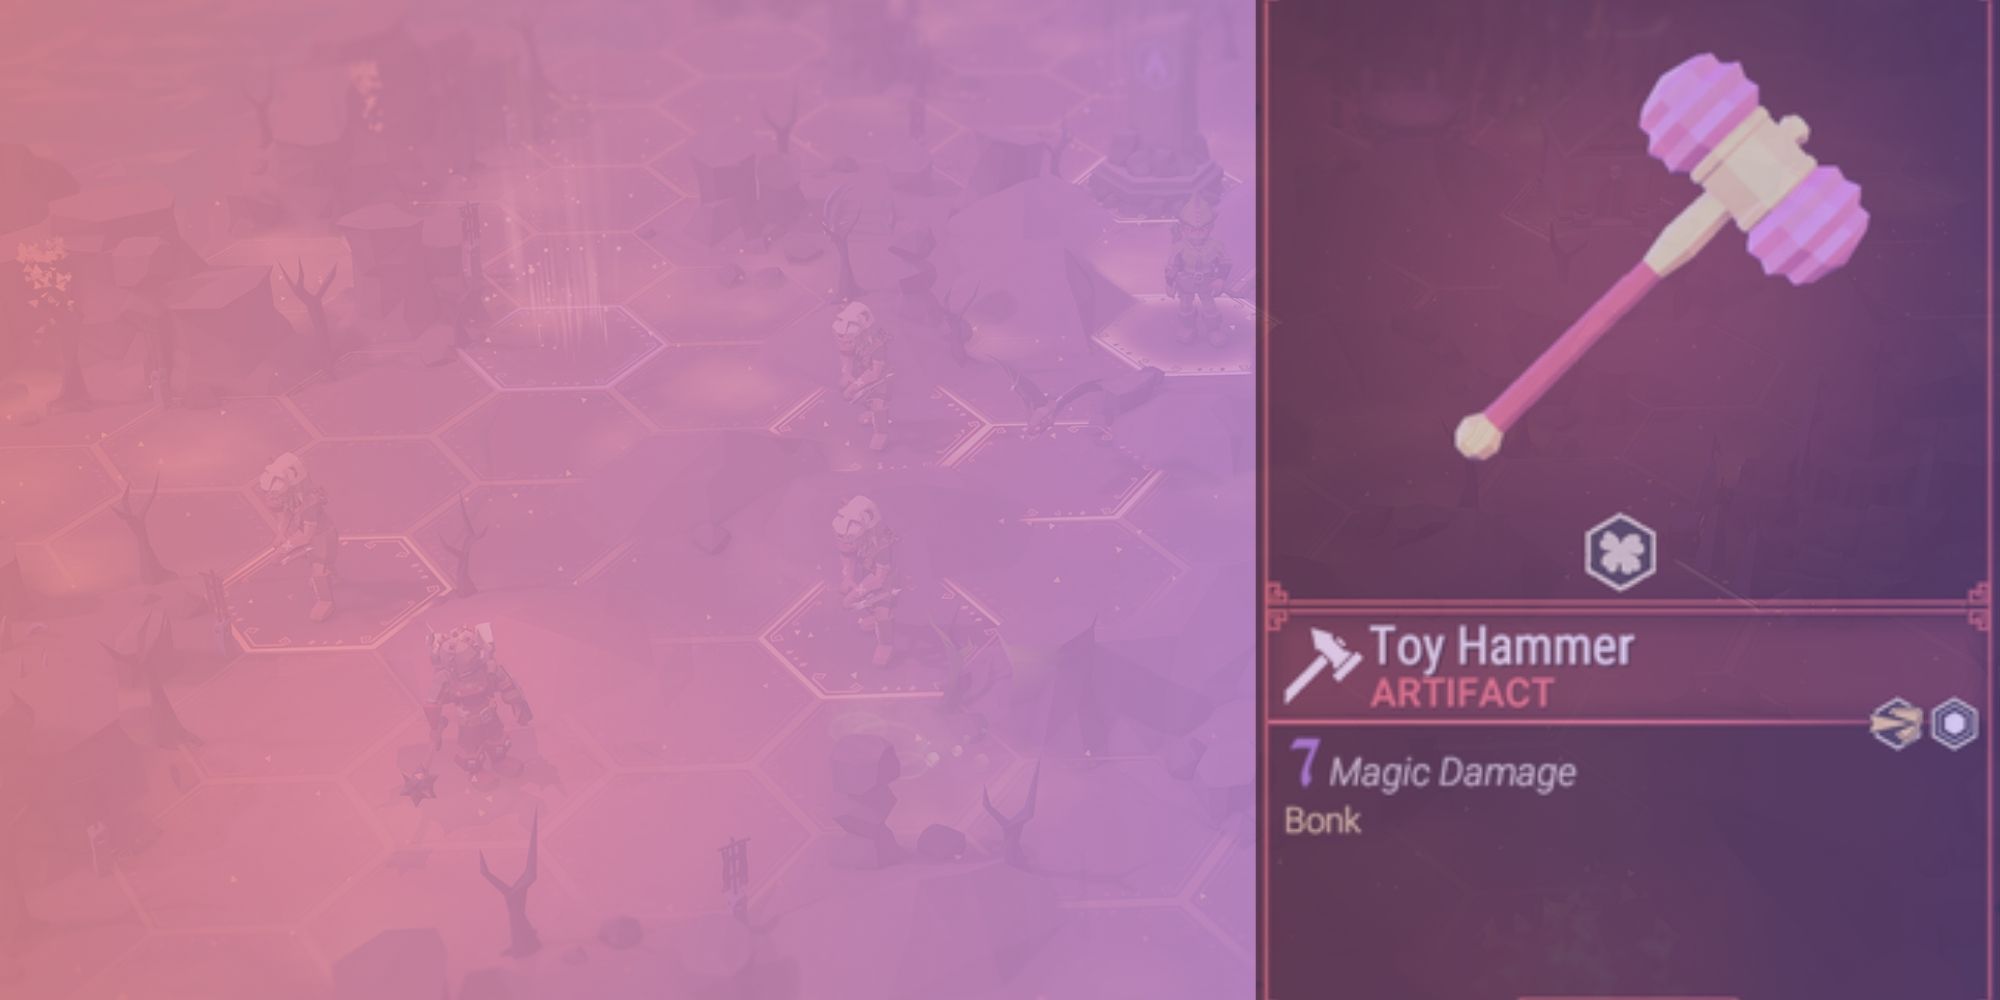 Toy hammer stats over a pink and purple gradient background